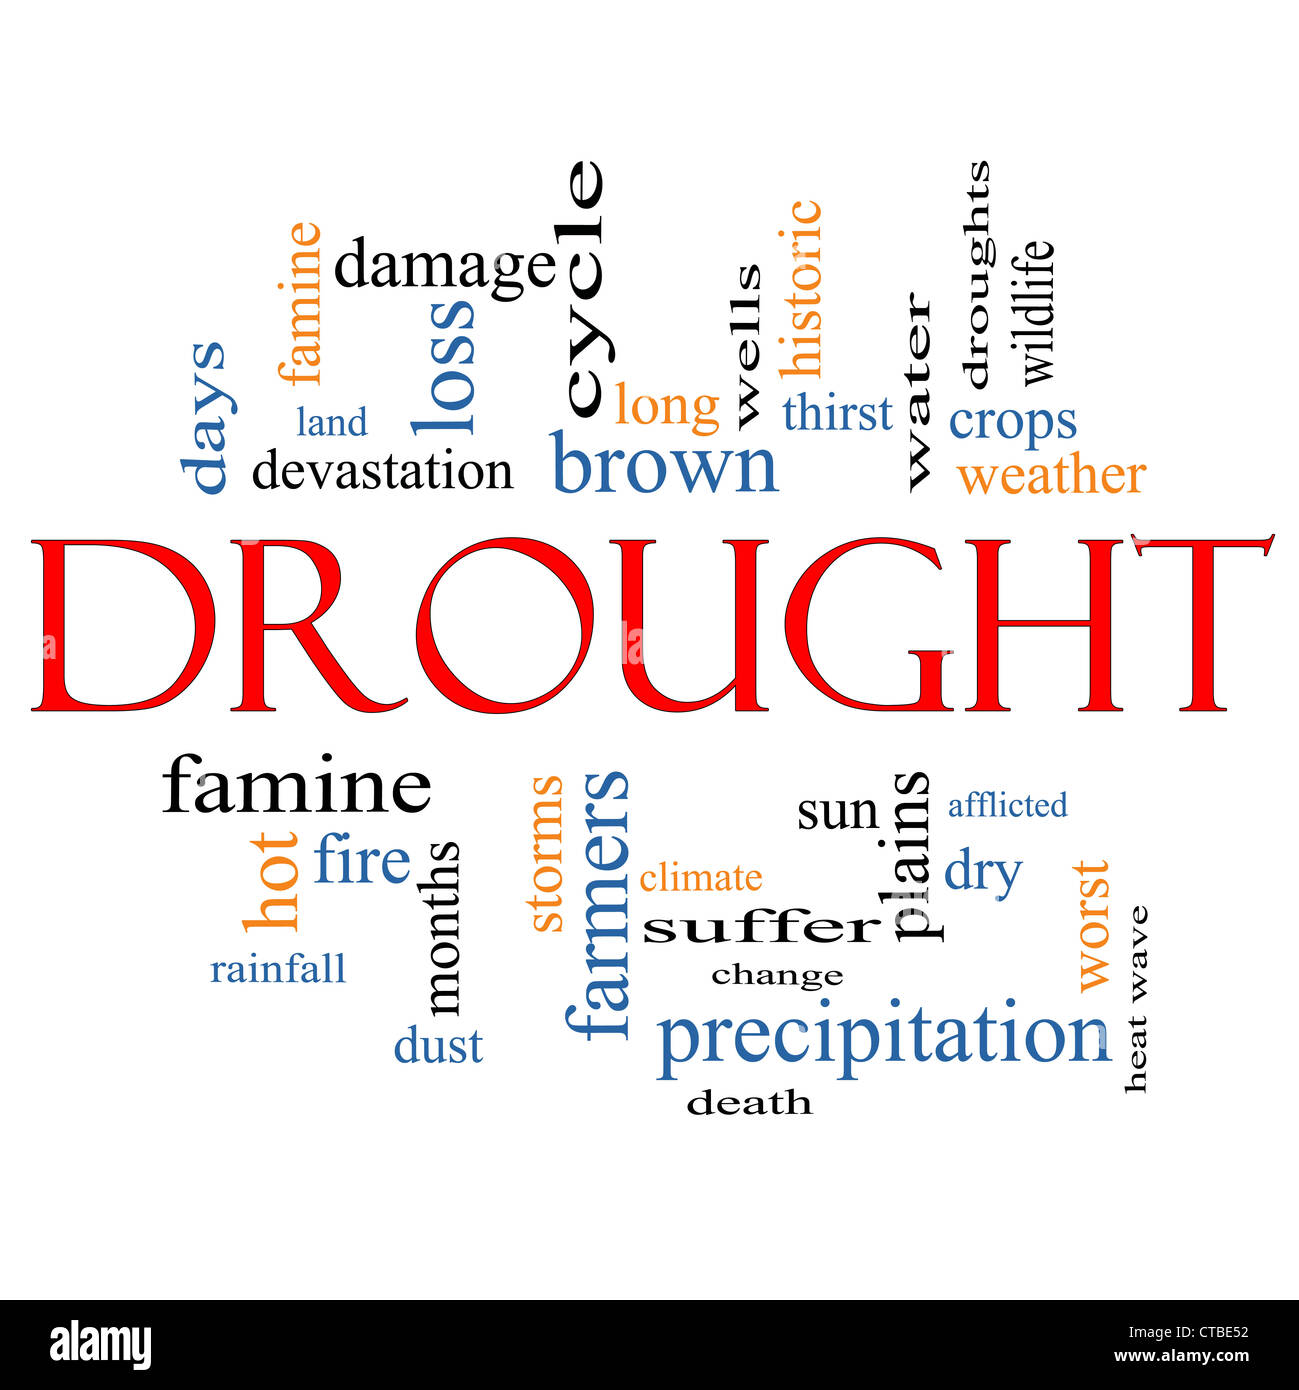 Drought Word Cloud Concept on a Blackboard with great terms such as farmers, death, water, crops, weather, dry, climate change Stock Photo